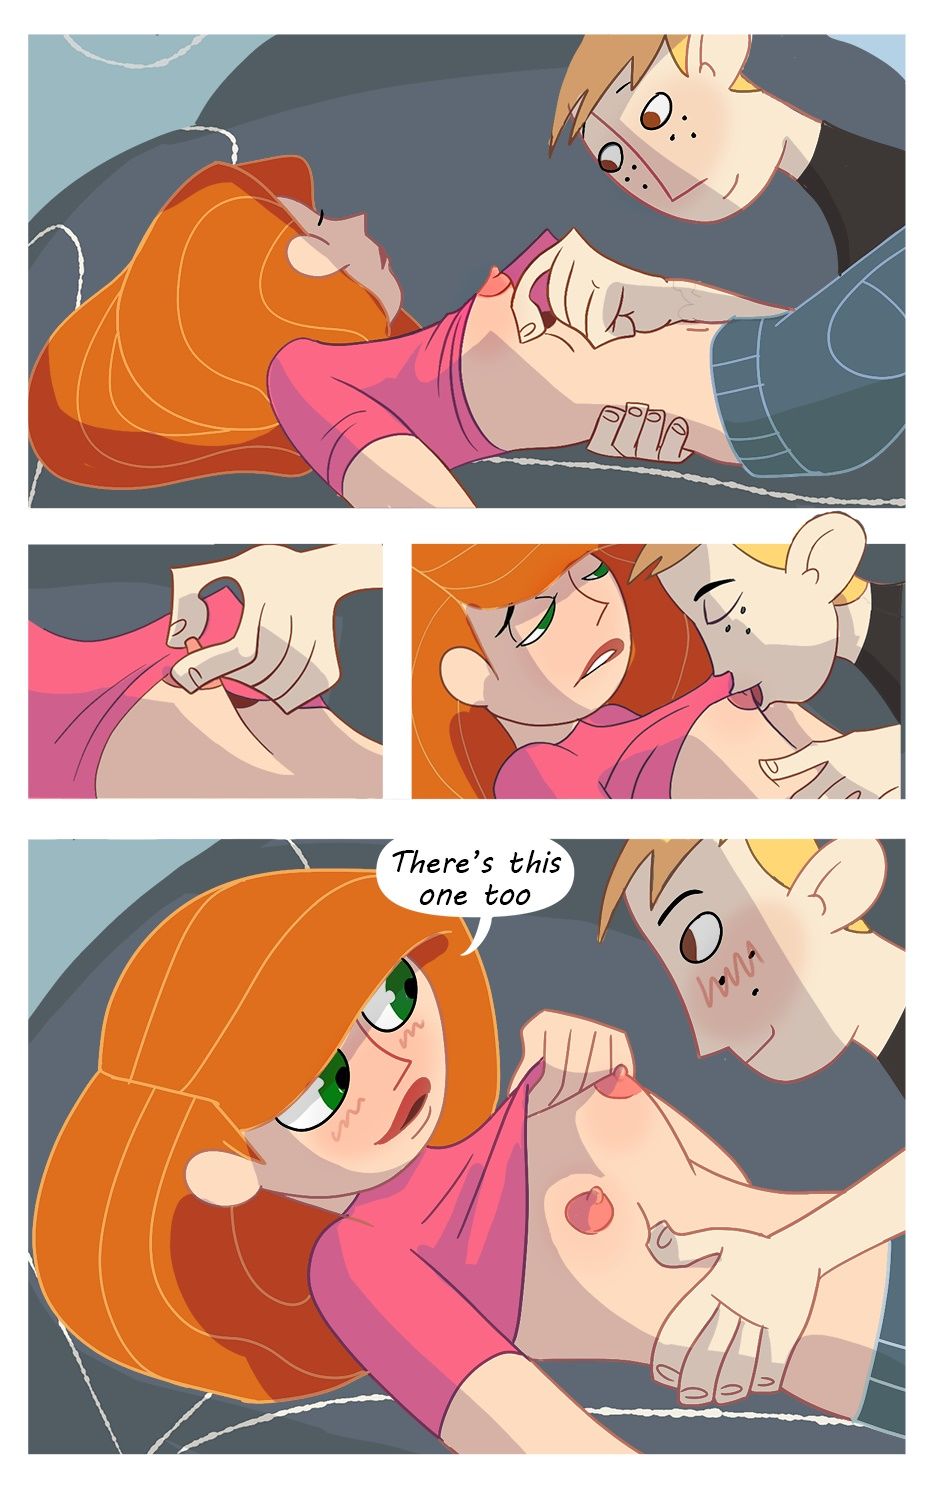 [Uanonkp] The Couch (Kim Possible) 9